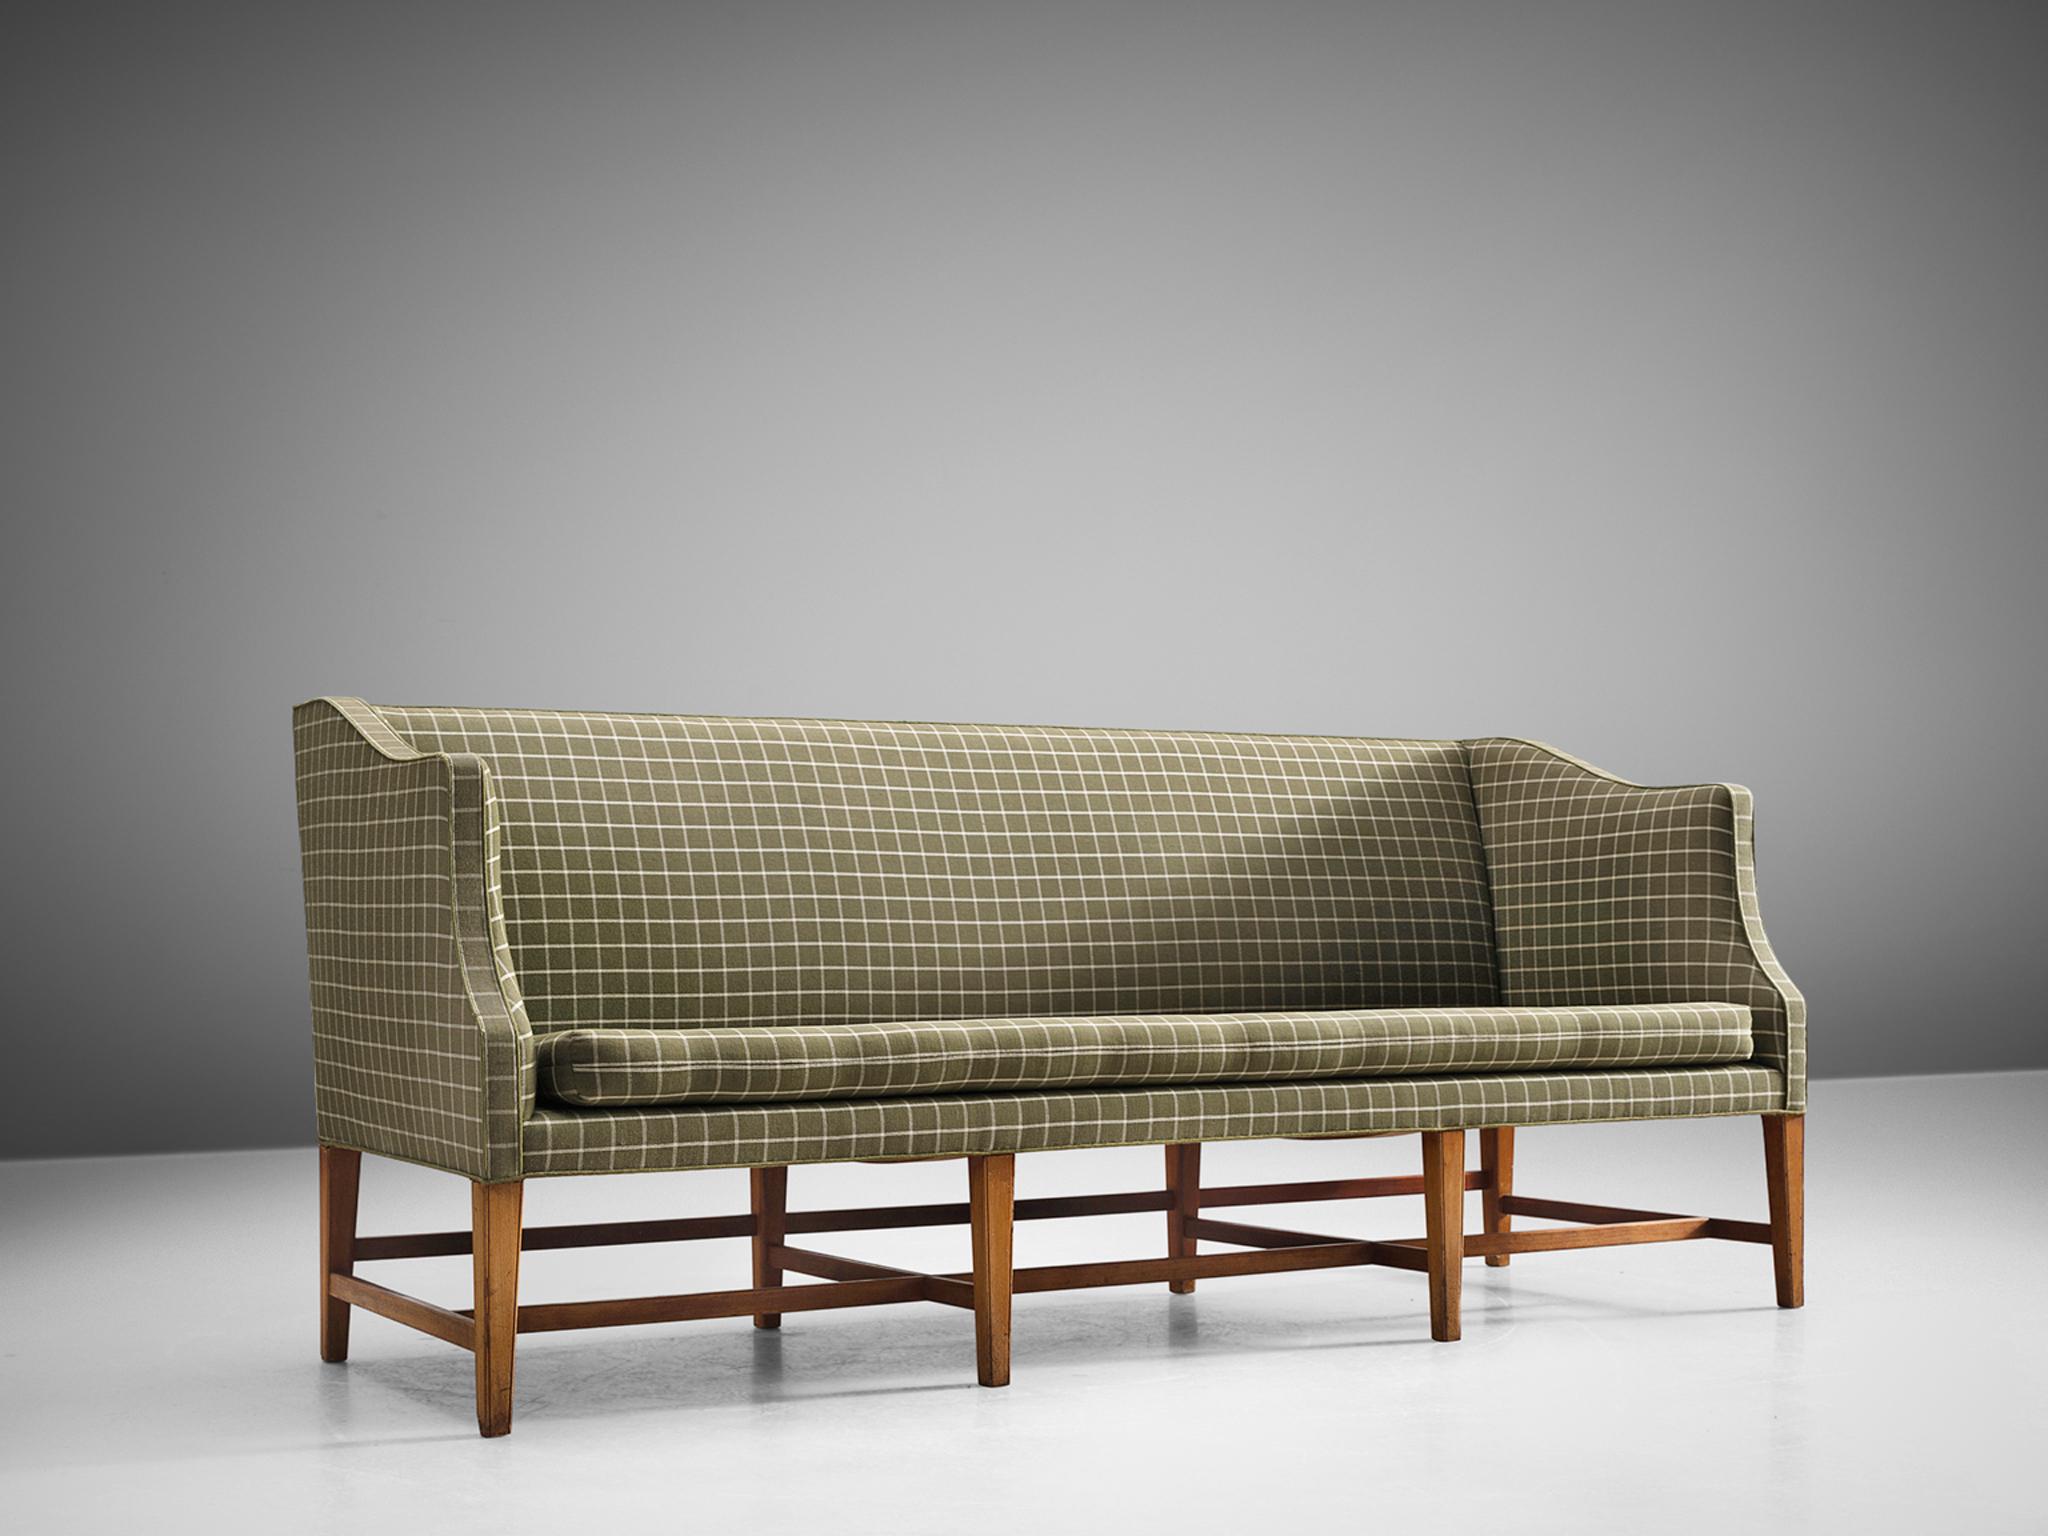 Danish cabinetmaker, fabric, teak, Denmark, 1950s. 

Free-standing three-seat sofa with eight profiled teak legs. The sofa is upholstered with a white and green checked fabric. The sofa features ornate forms and shapes and holds a geometric, rigid